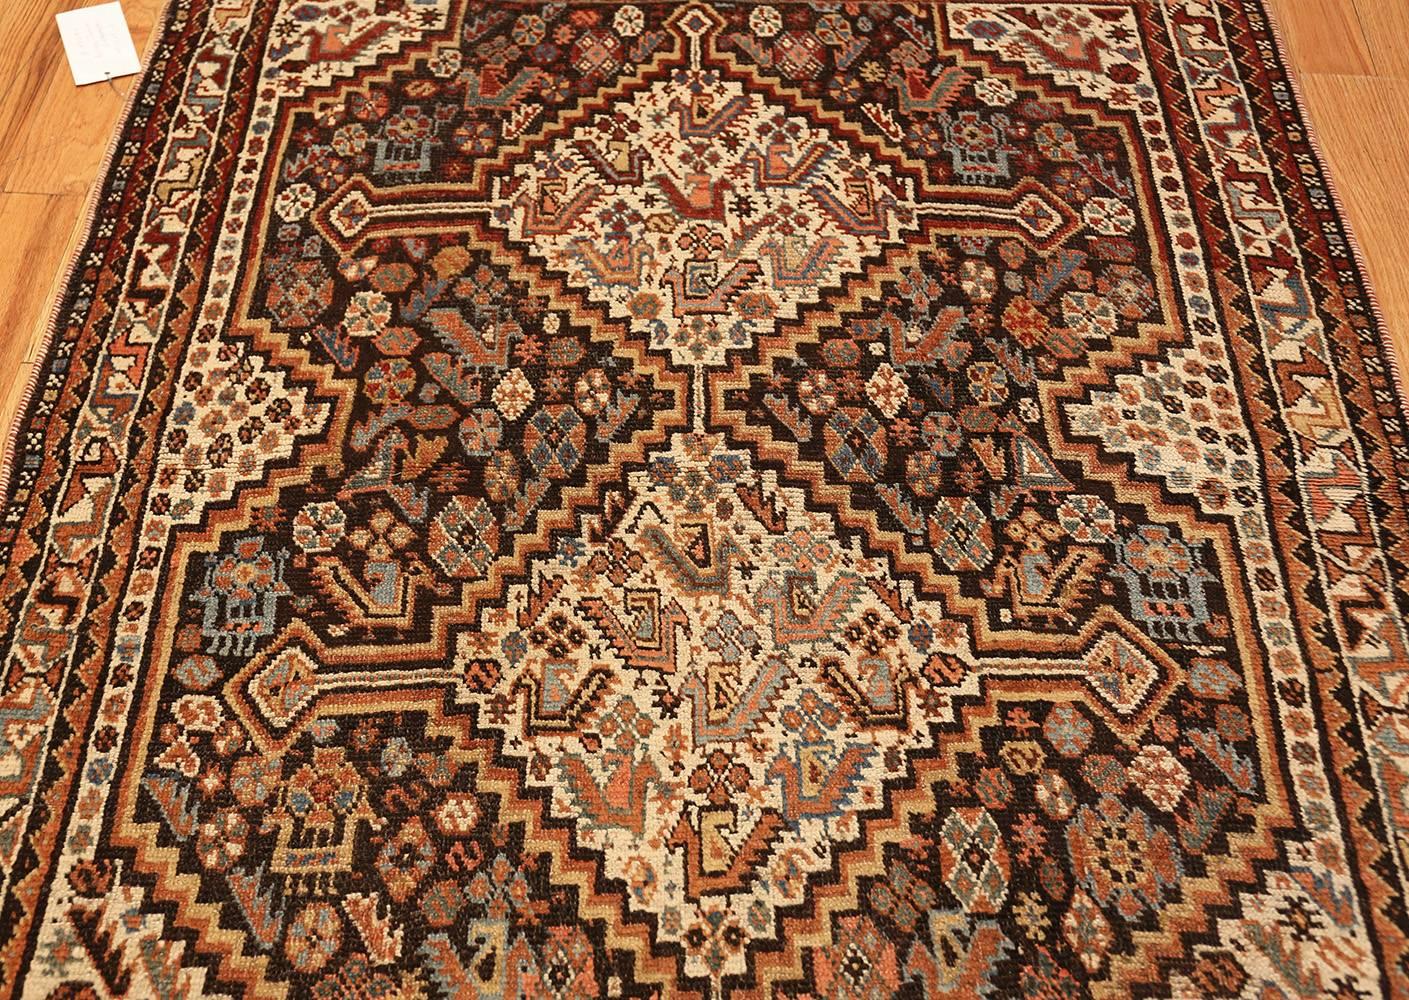 Tribal Antique Ghashgai Persian Rug. Size: 4 ft x 5 ft 2 in (1.22 m x 1.57 m)